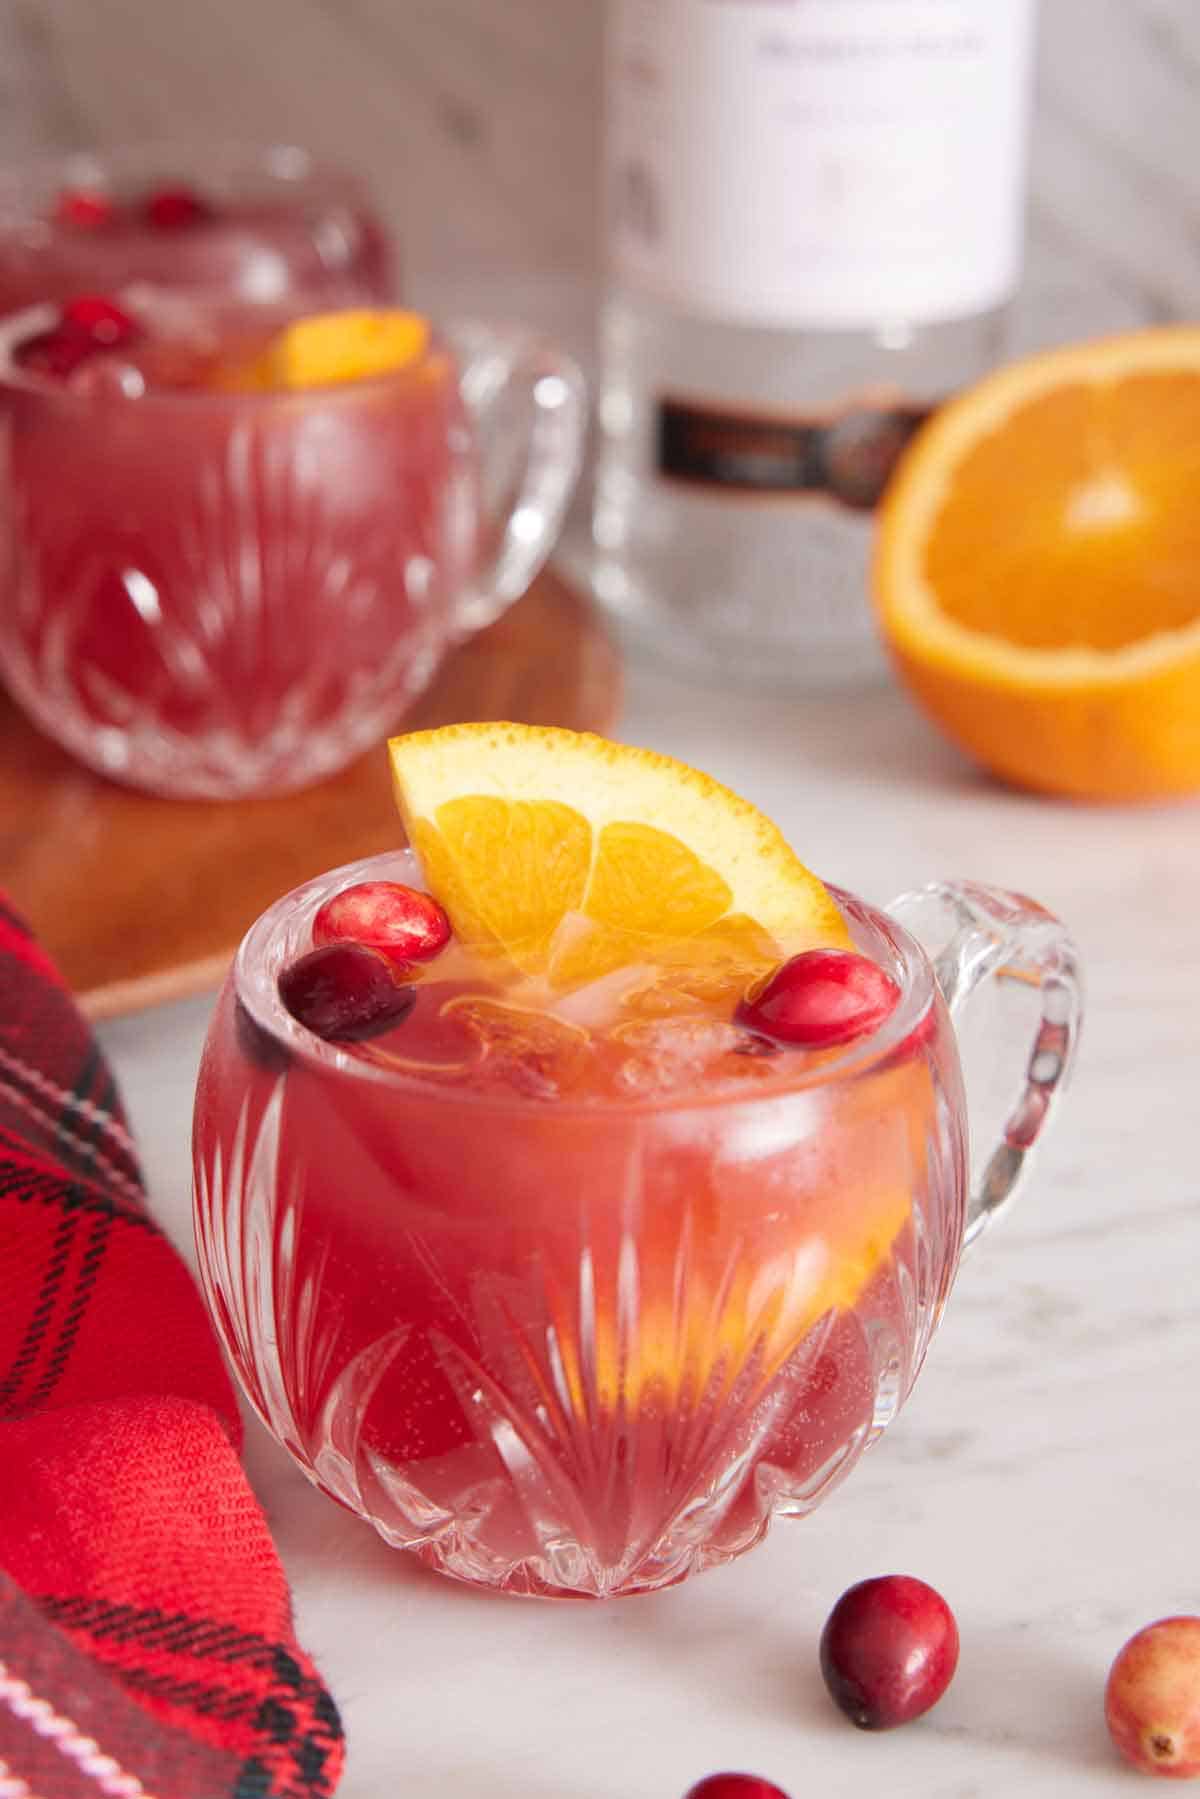 A glass of Christmas punch with orange and cranberries with more in the background along with a cut orange and bottle of vodka.